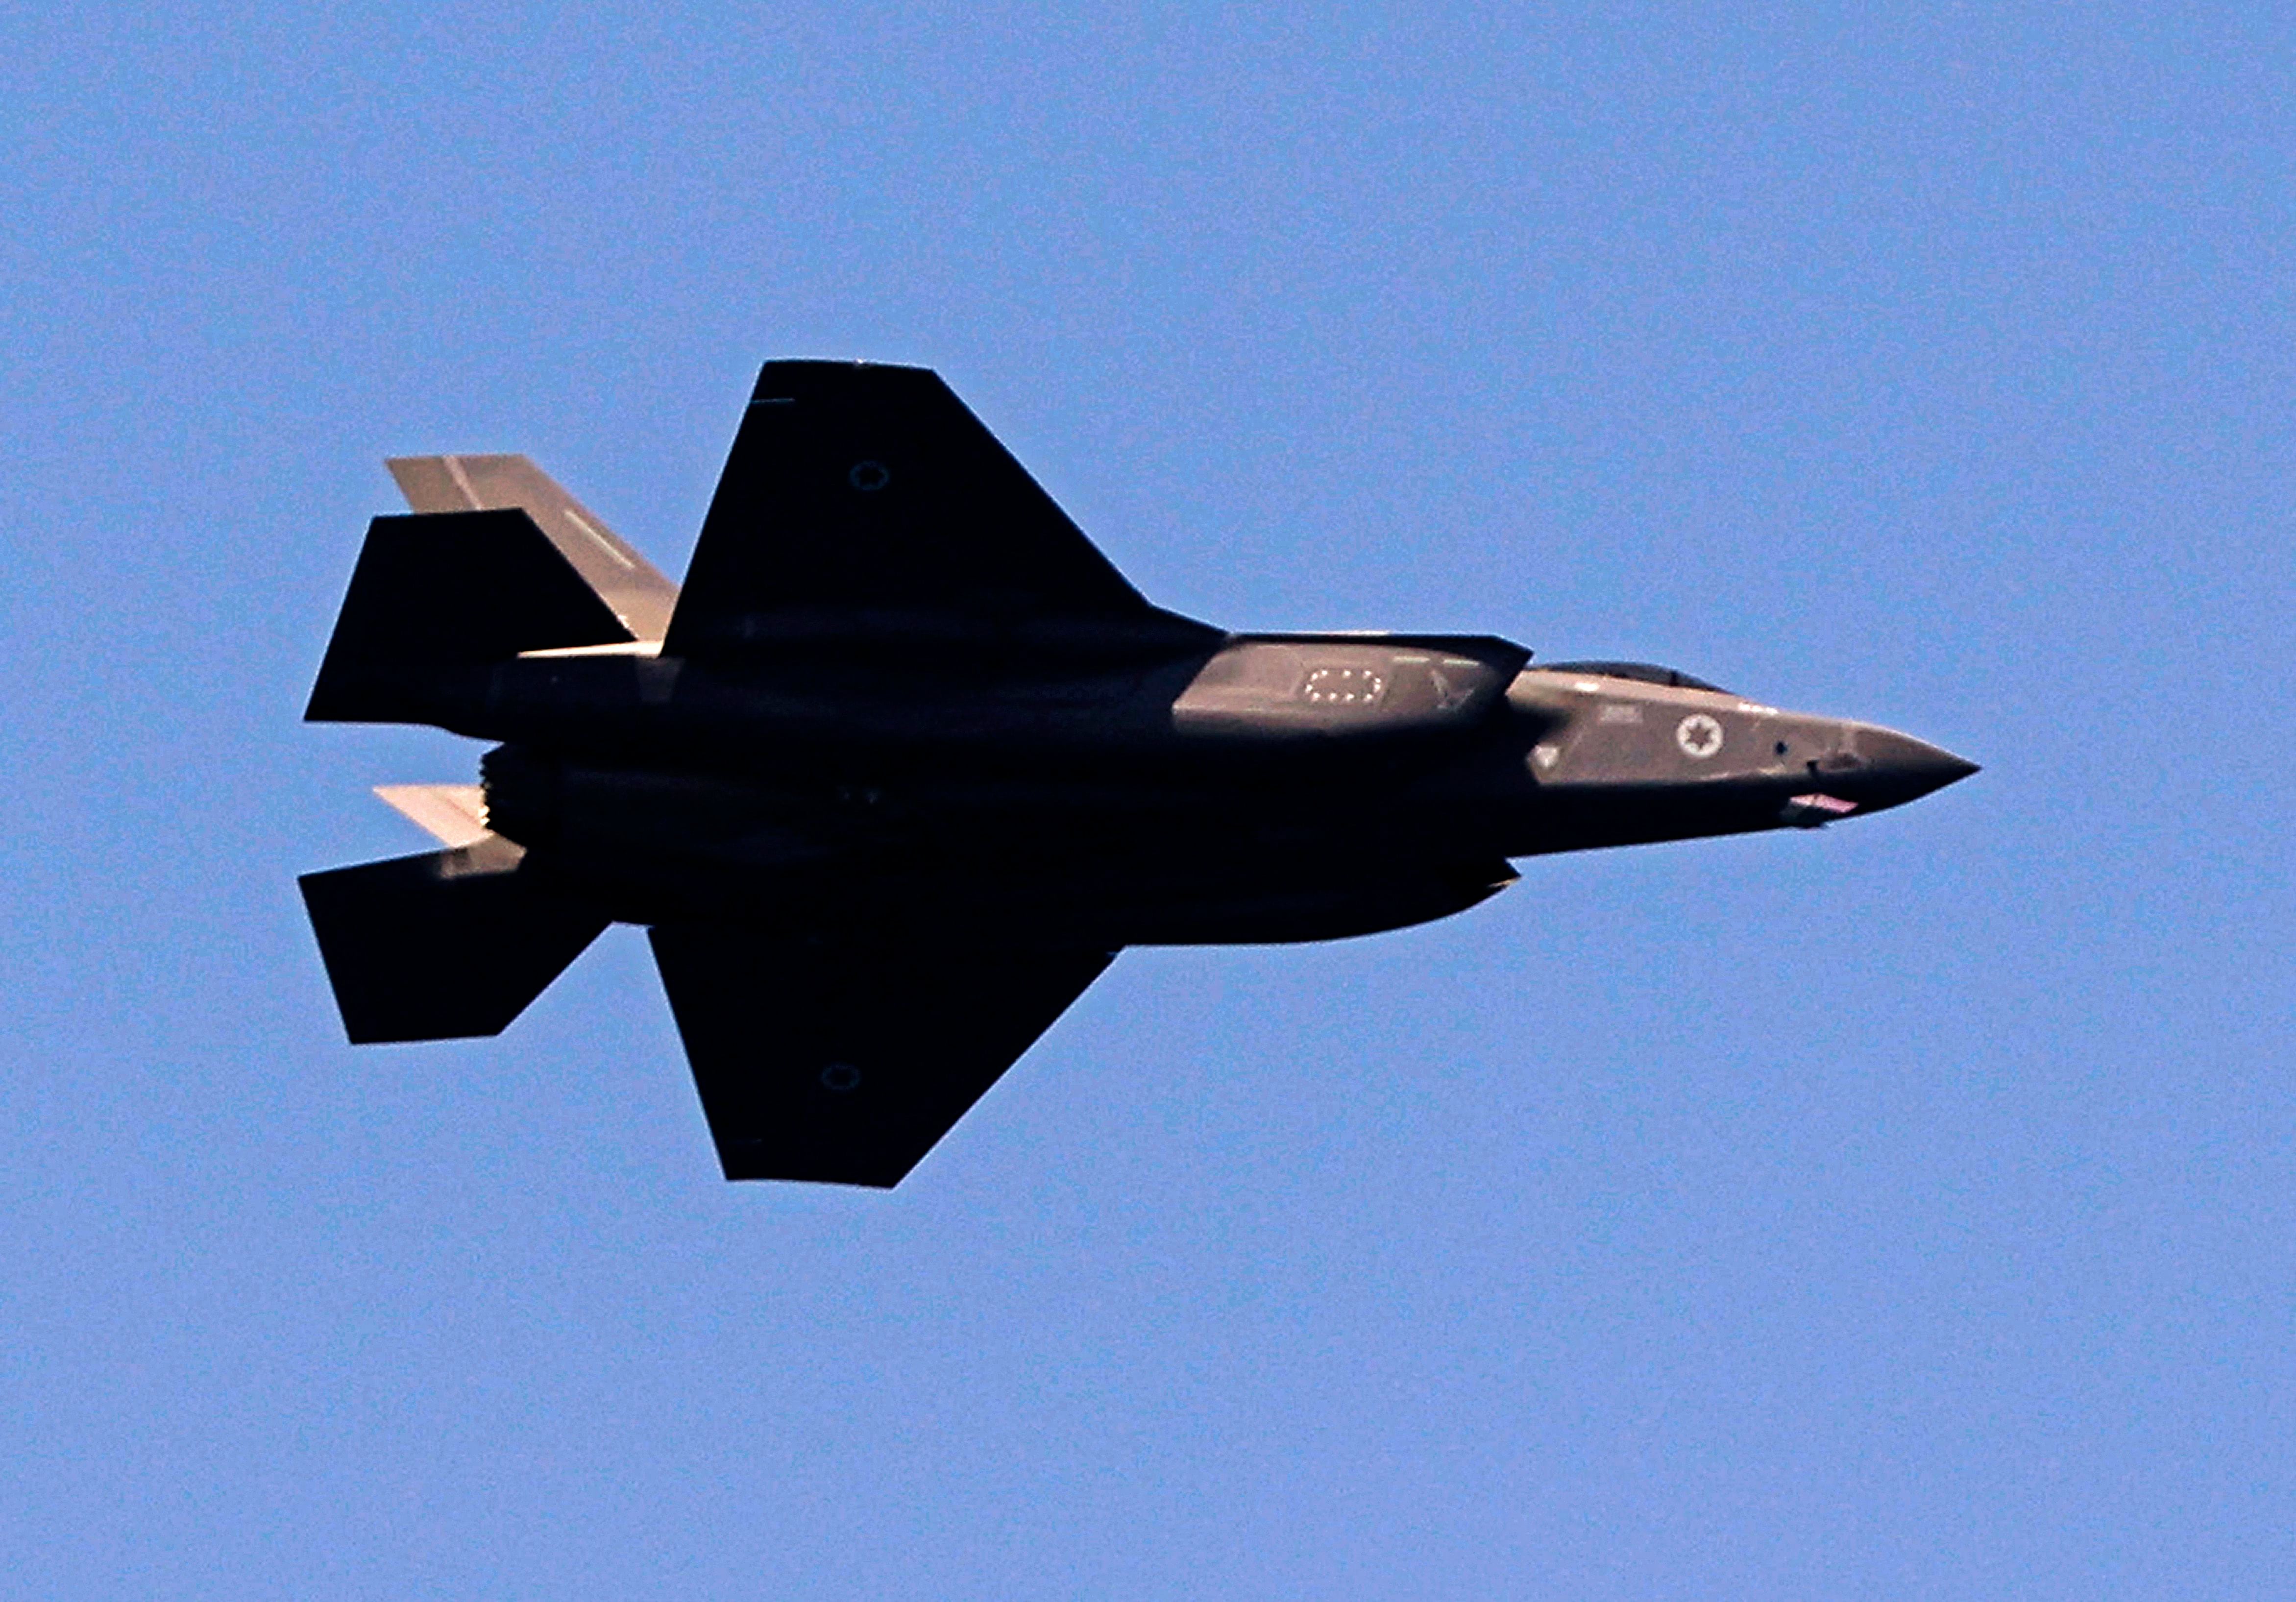 An Israeli F-35 fighter jet flies over the Mediterranean coastal city of Tel Aviv during the country's 73rd Independence Day celebrations, on April 15, 2021. (Photo by JACK GUEZ/AFP).